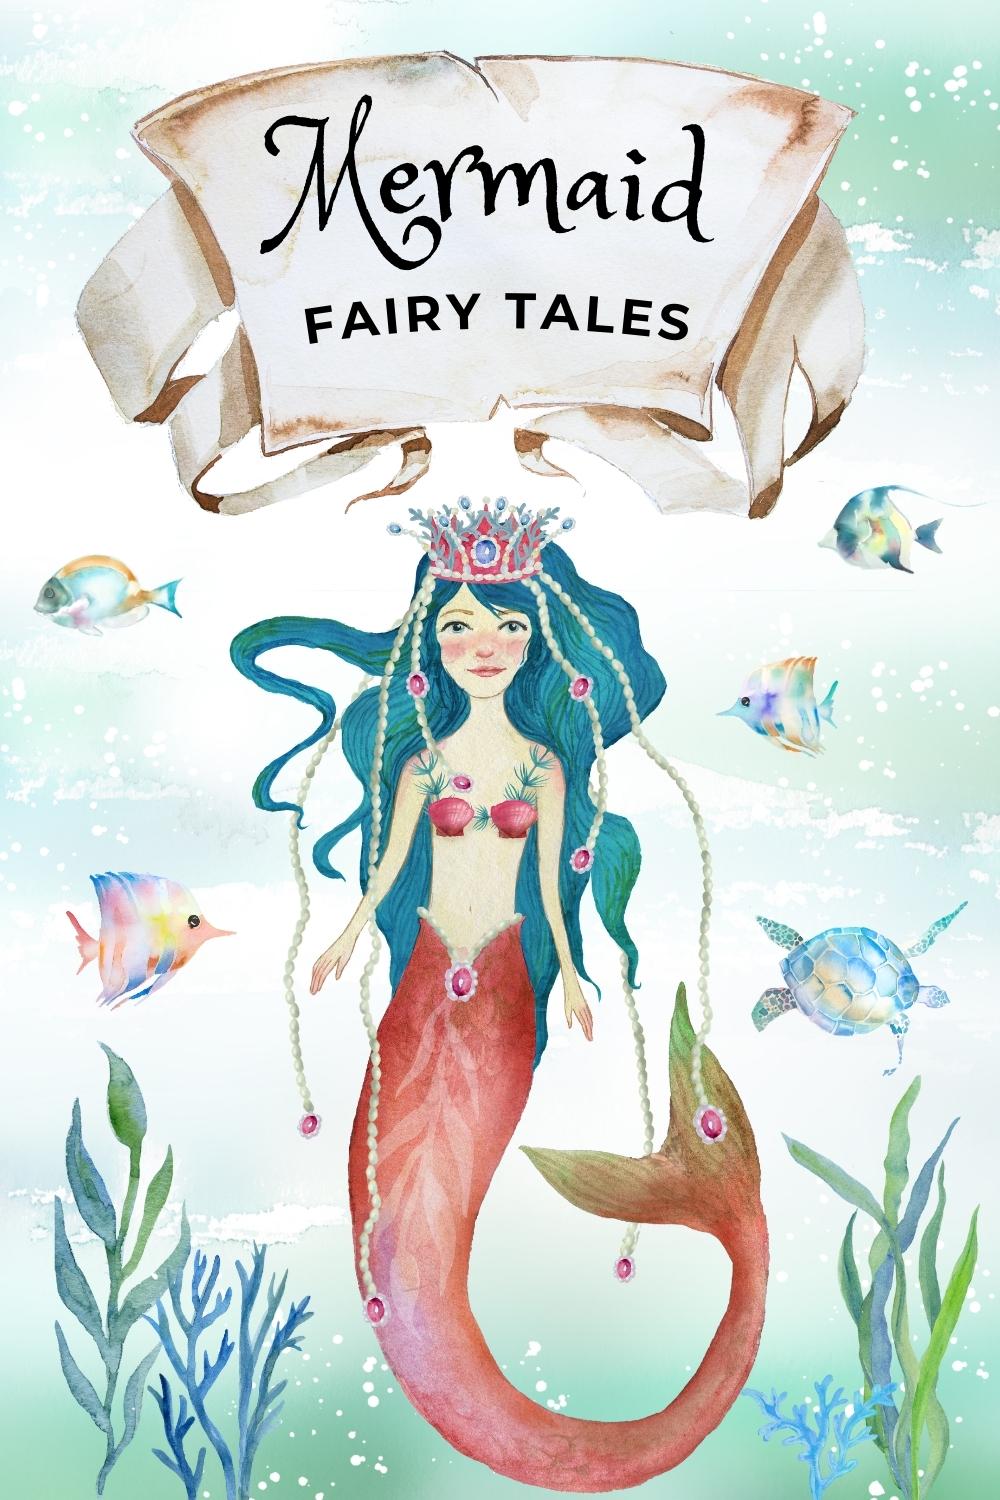 These mermaid fairy tales will take you on a magical adventure in the sea!